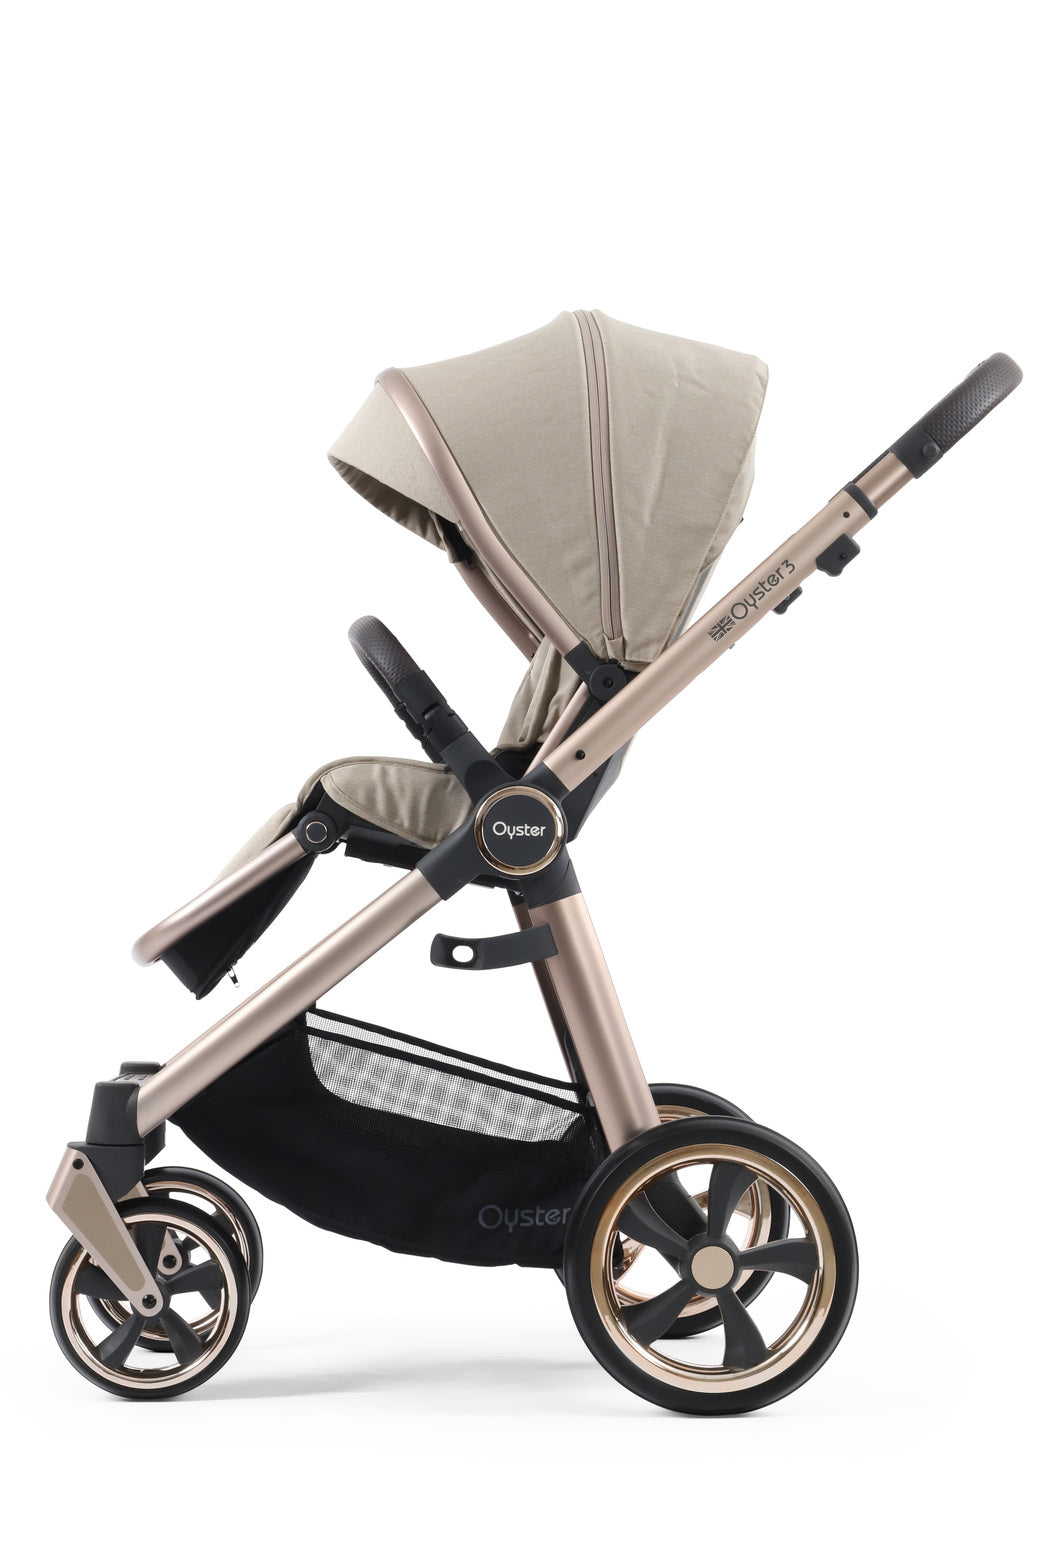 Babystyle Oyster 3 Pushchair + Carrycot - Creme Brulee - For Your Little One